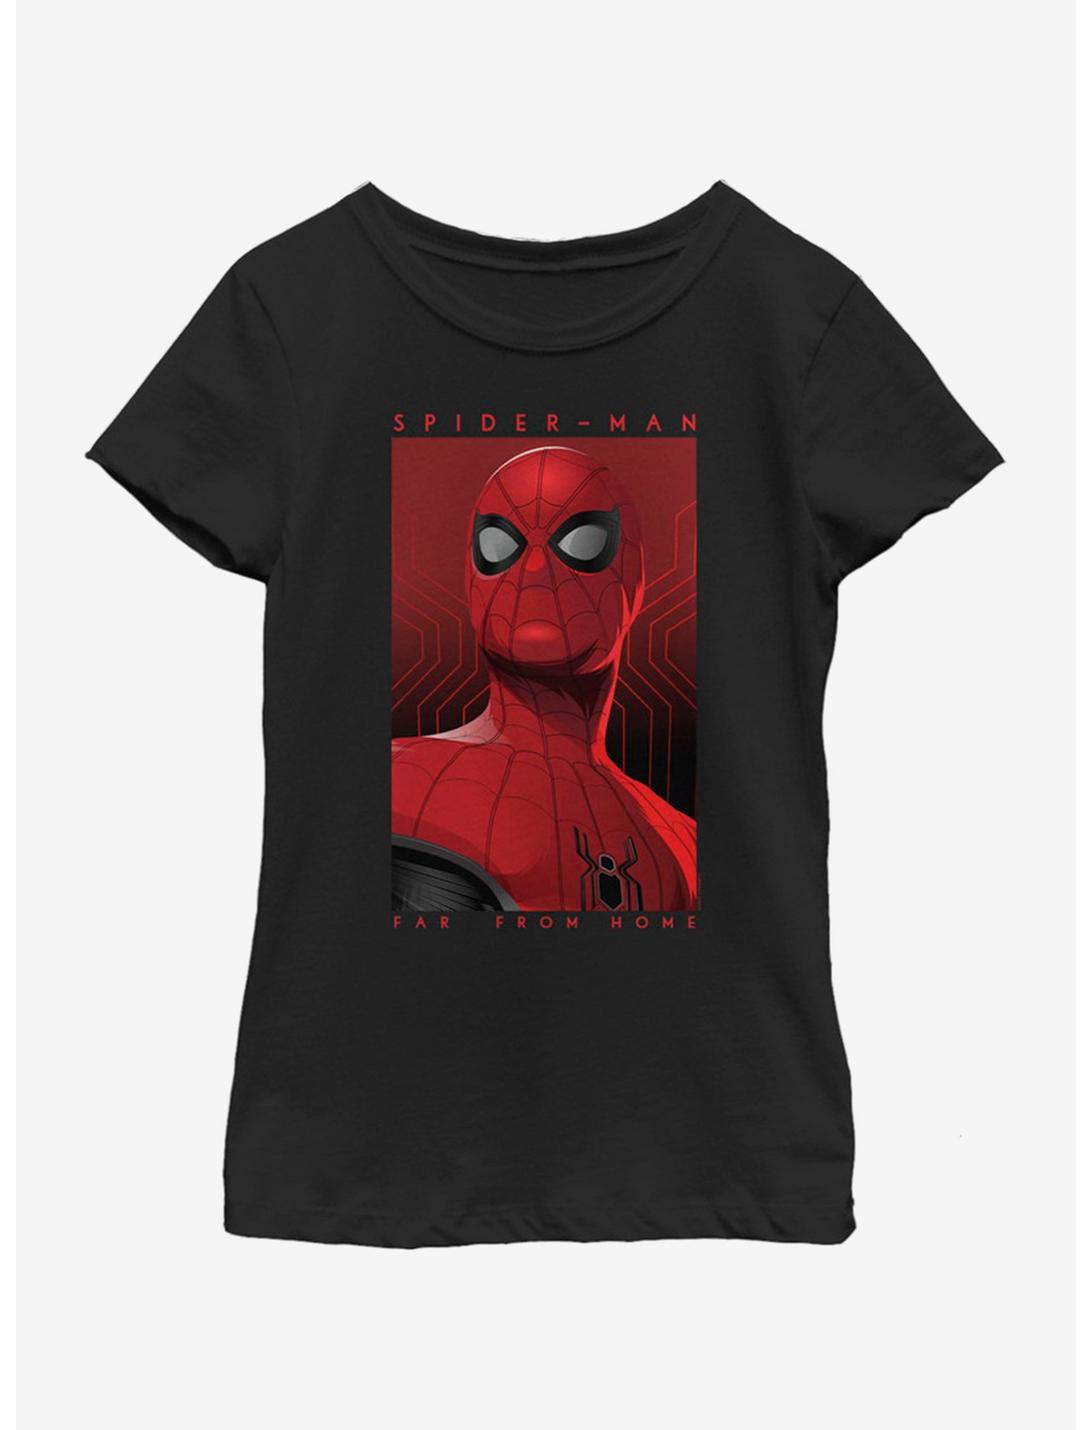 Marvel Spiderman: Far From Home Posterized Spidey Youth Girls T-Shirt, BLACK, hi-res